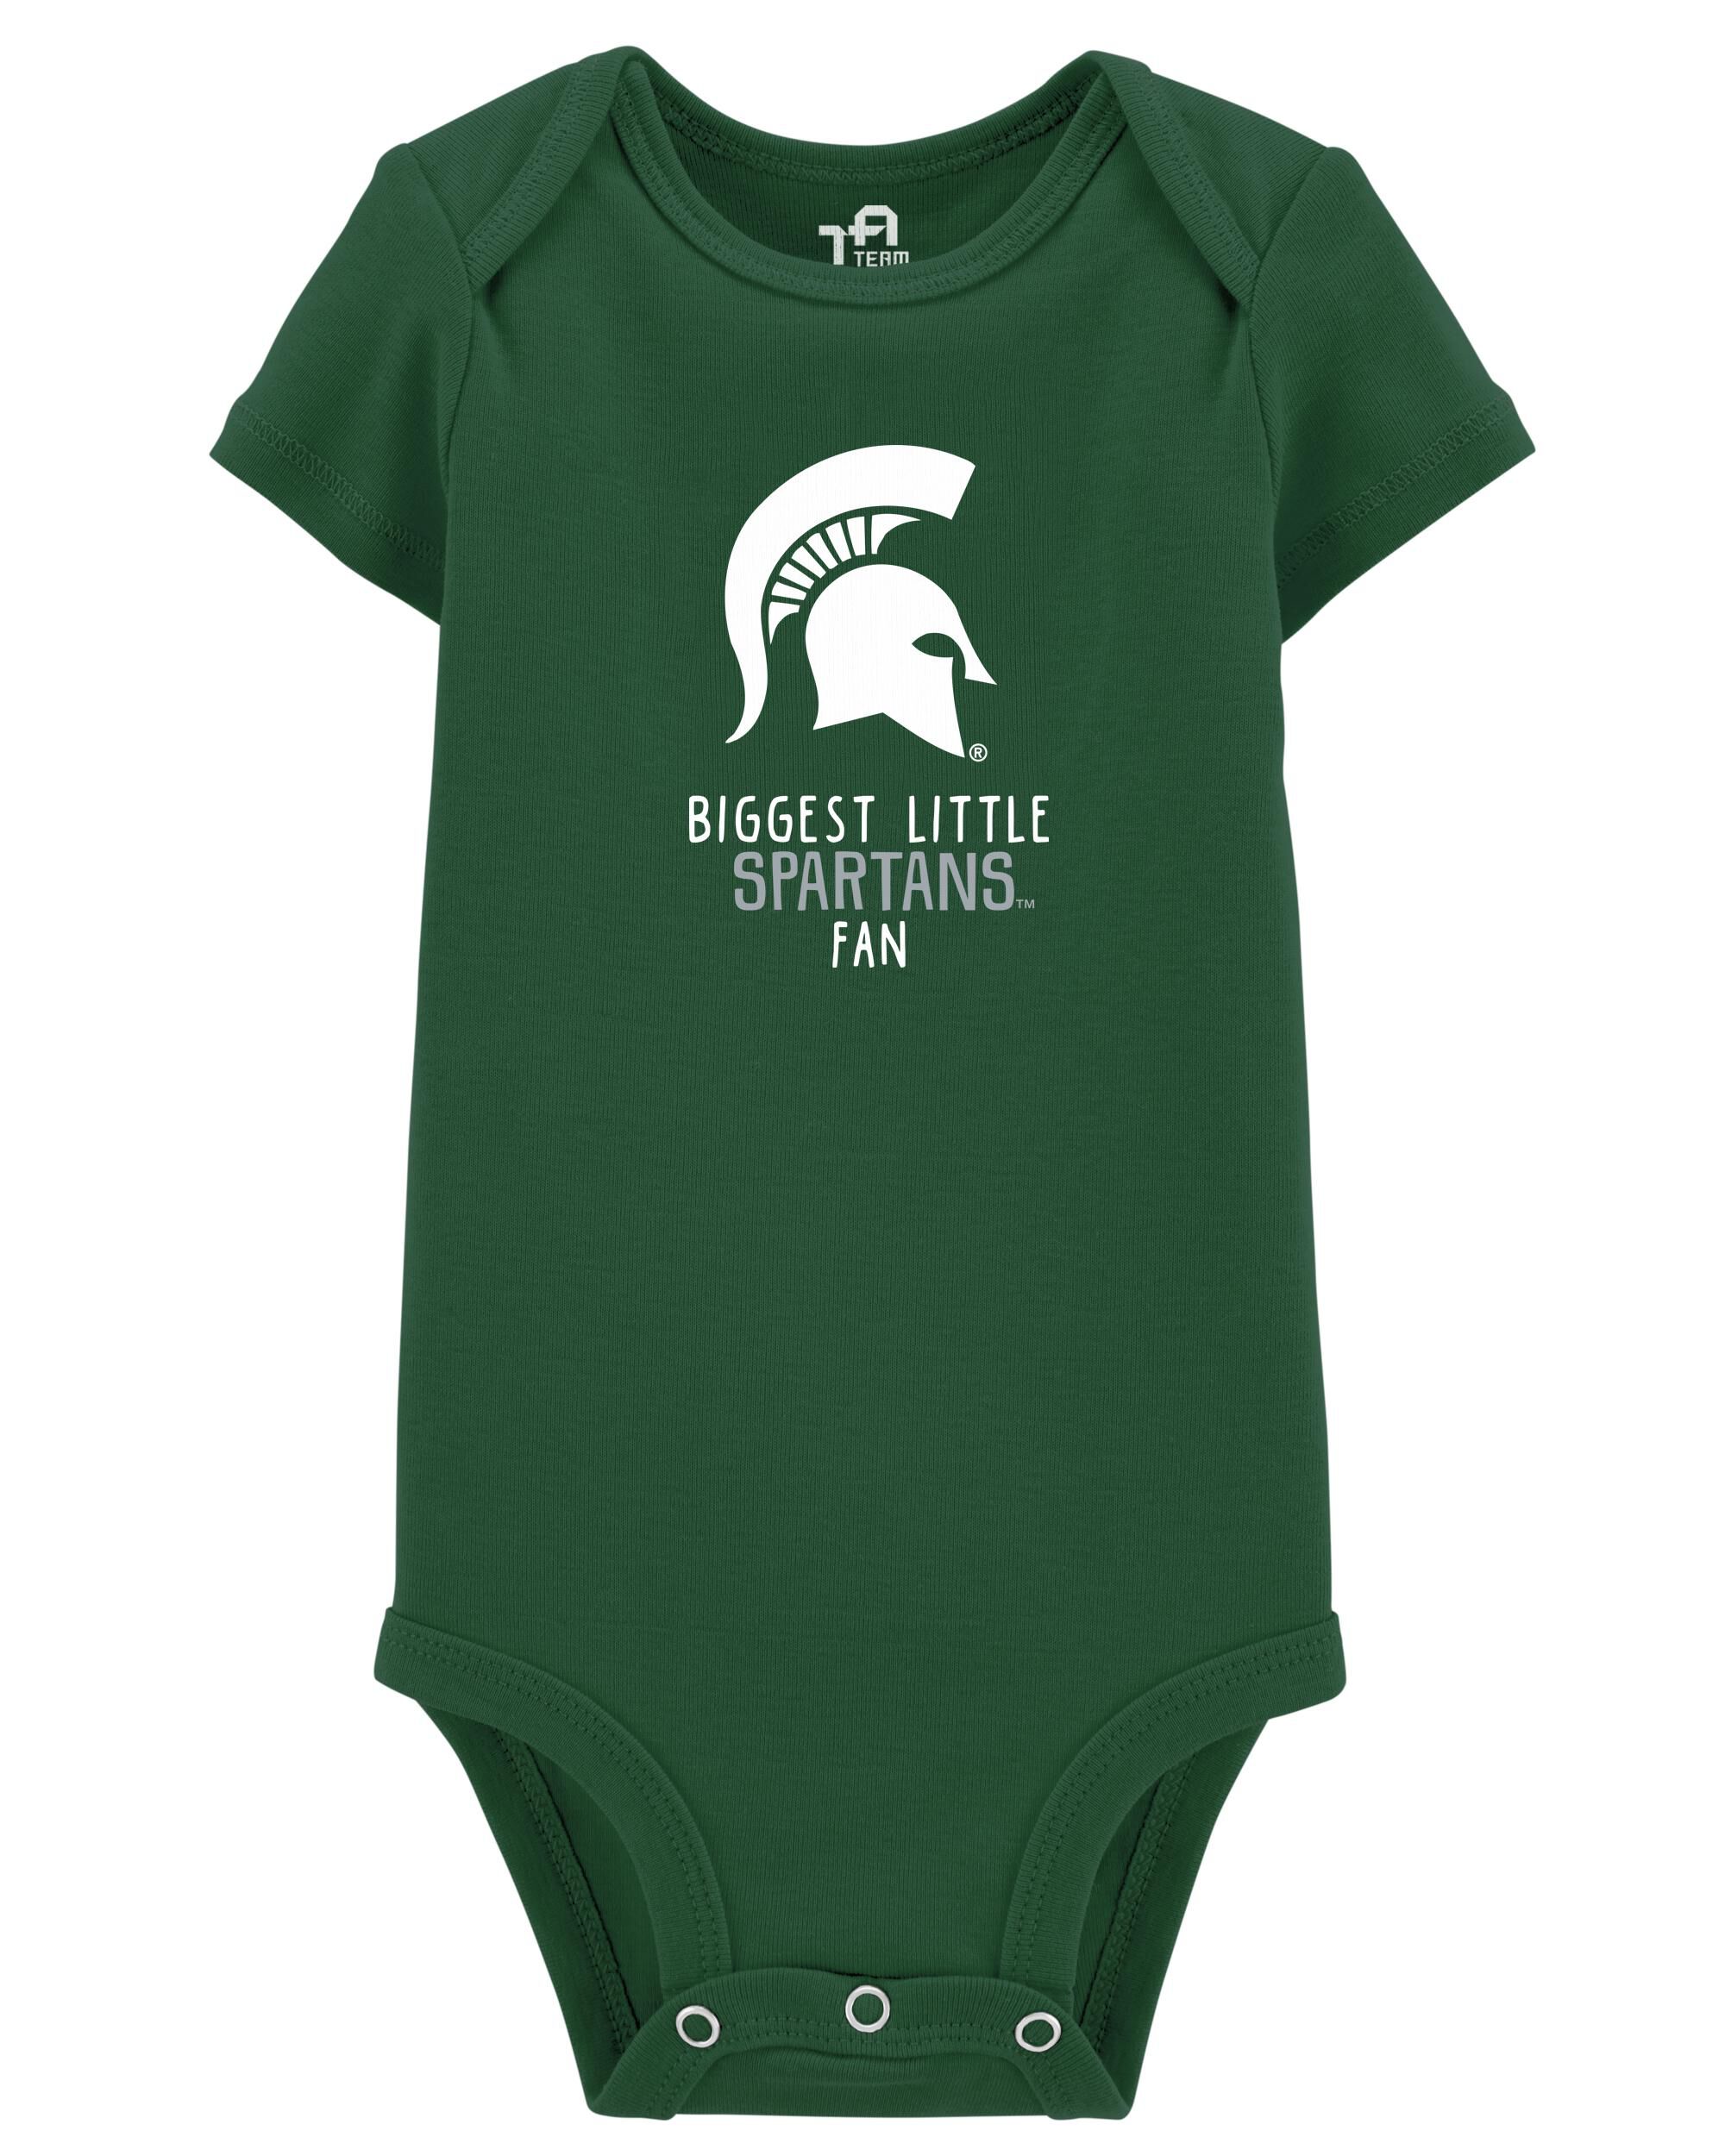 Carters Baby NCAA Michigan State Spartans TM Bodysuit